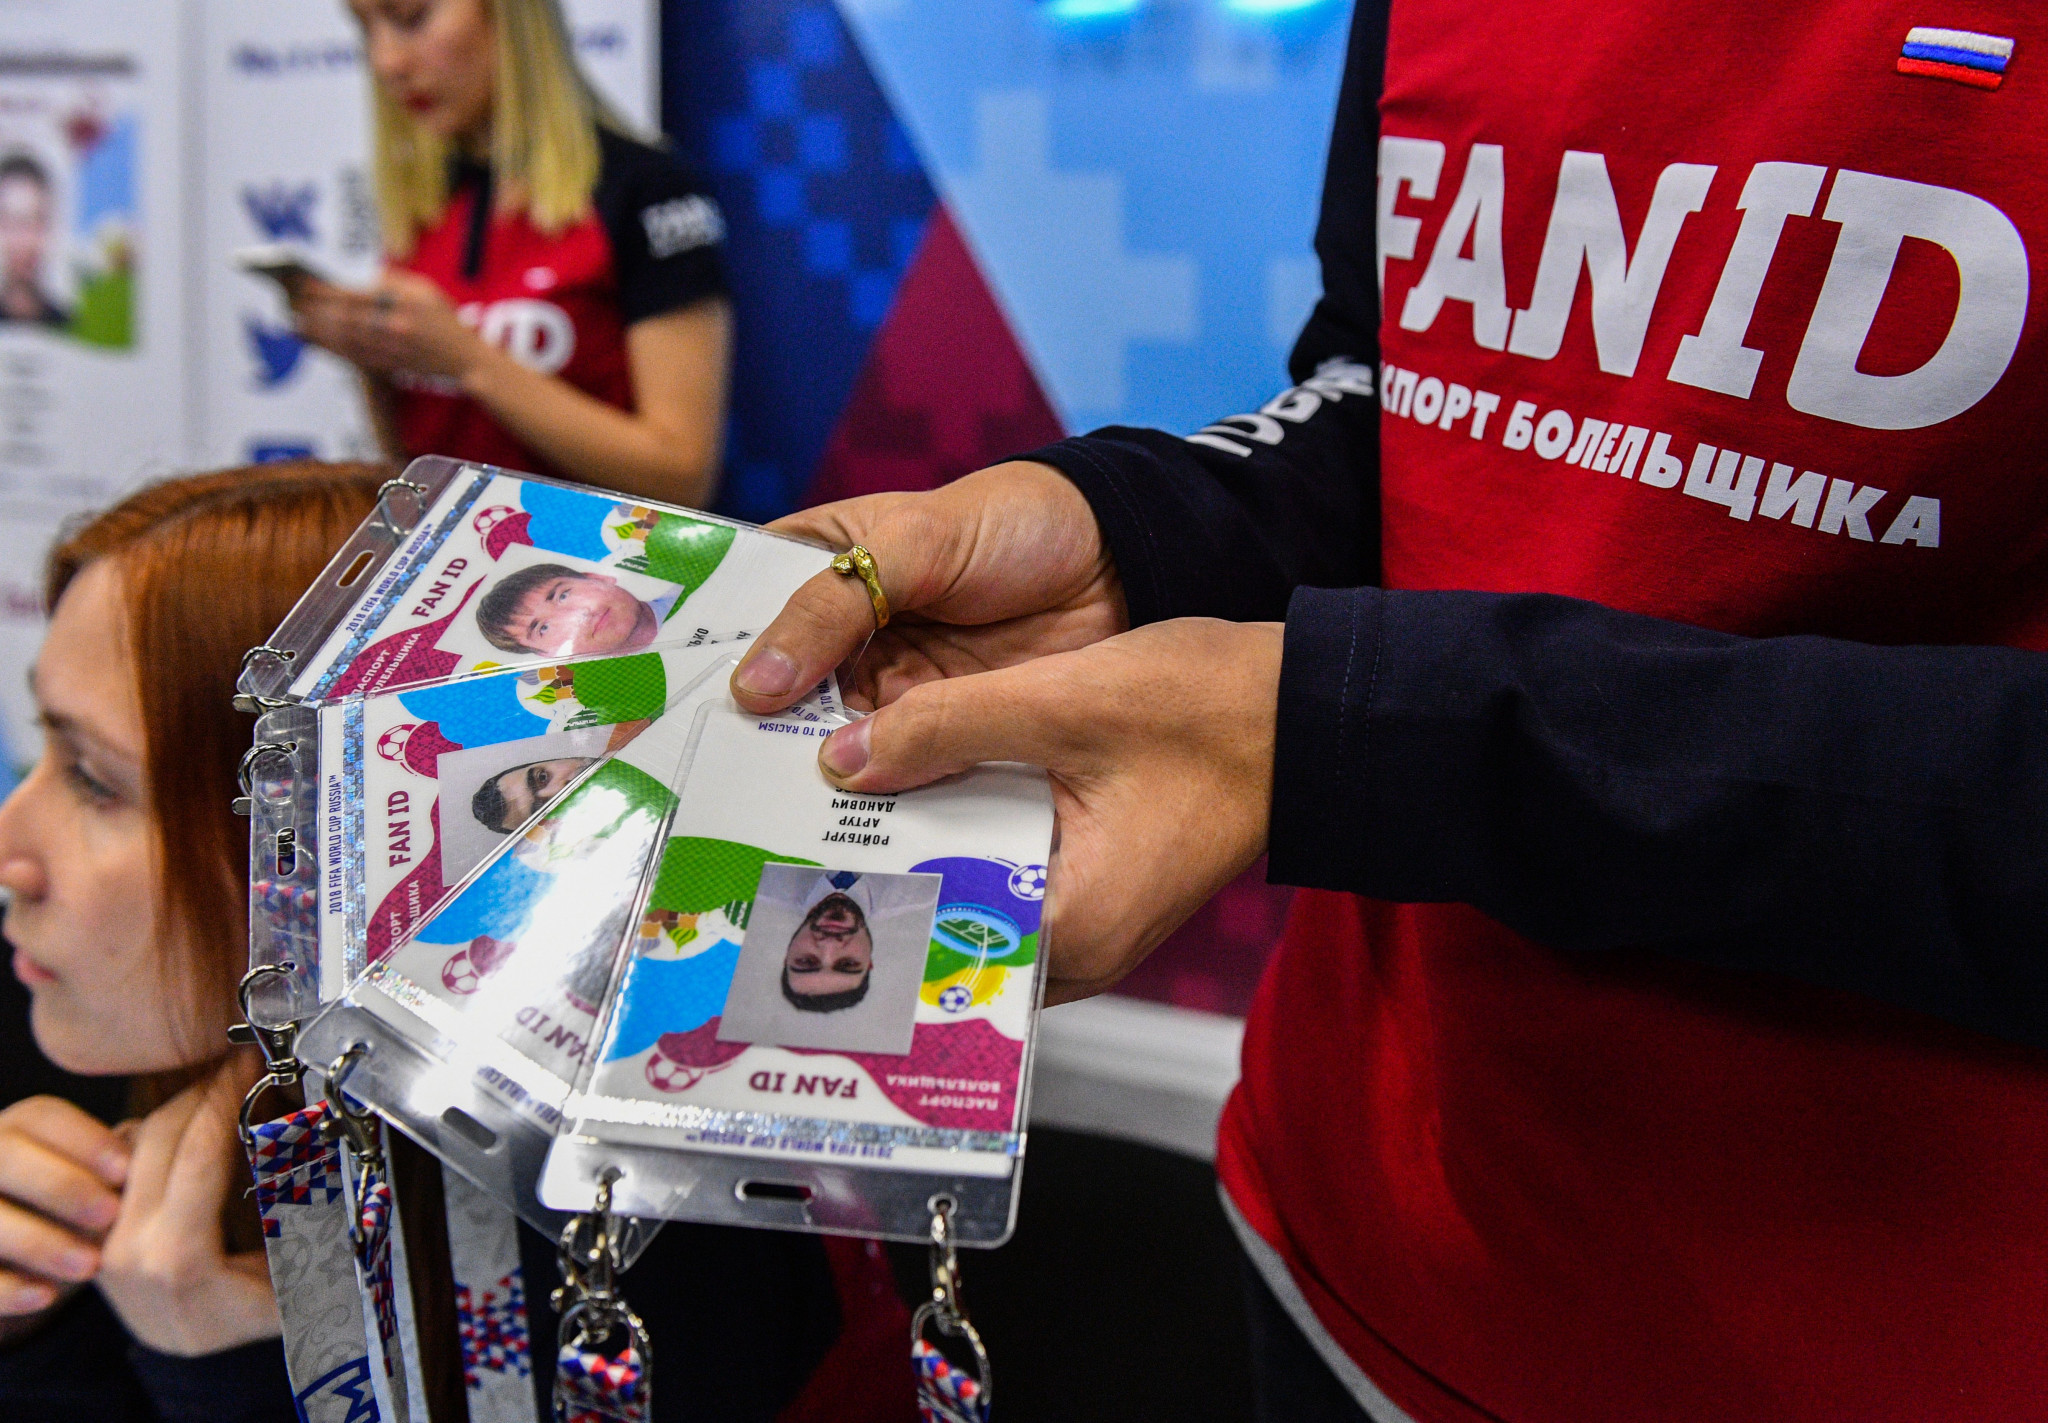 Football supporters who signed up for the FAN ID scheme were able to enjoy visa-free success to Russia during the FIFA World Cup and Government officials may now extend it to include Krasnoyarsk 2019 ©Getty Images